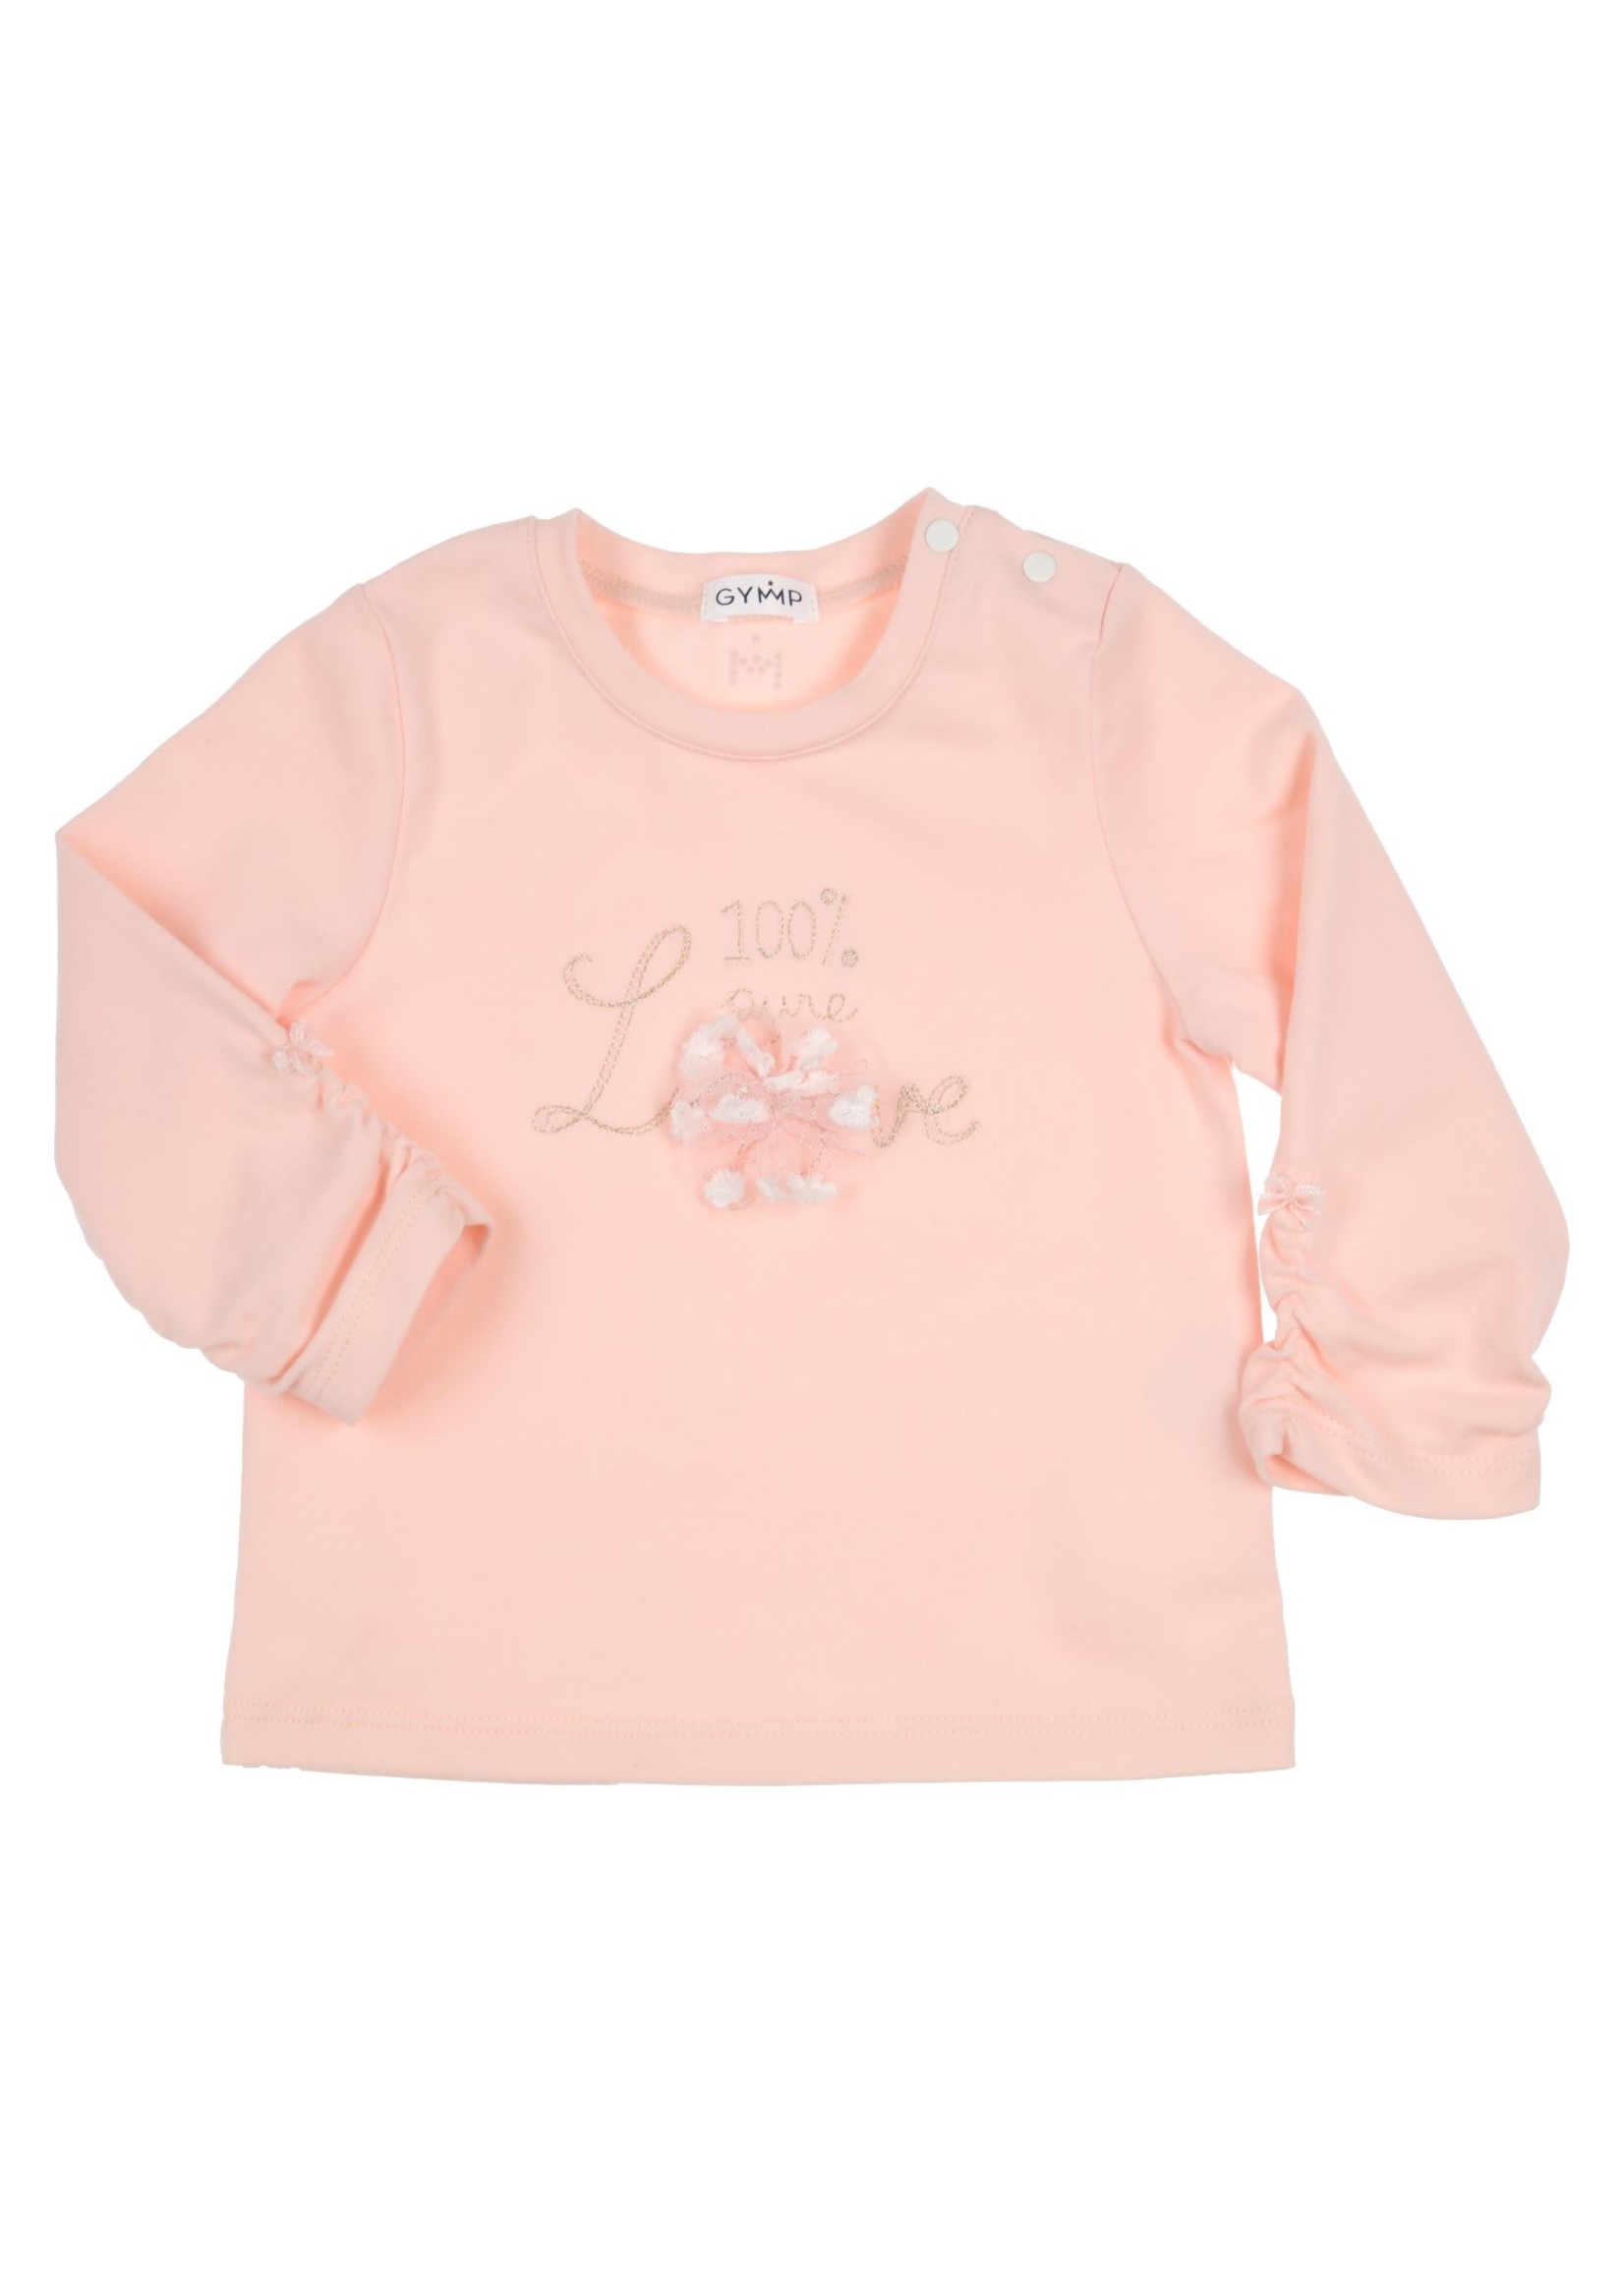 Gymp Gymp longsleeve 100% pure LOVE vieux rose